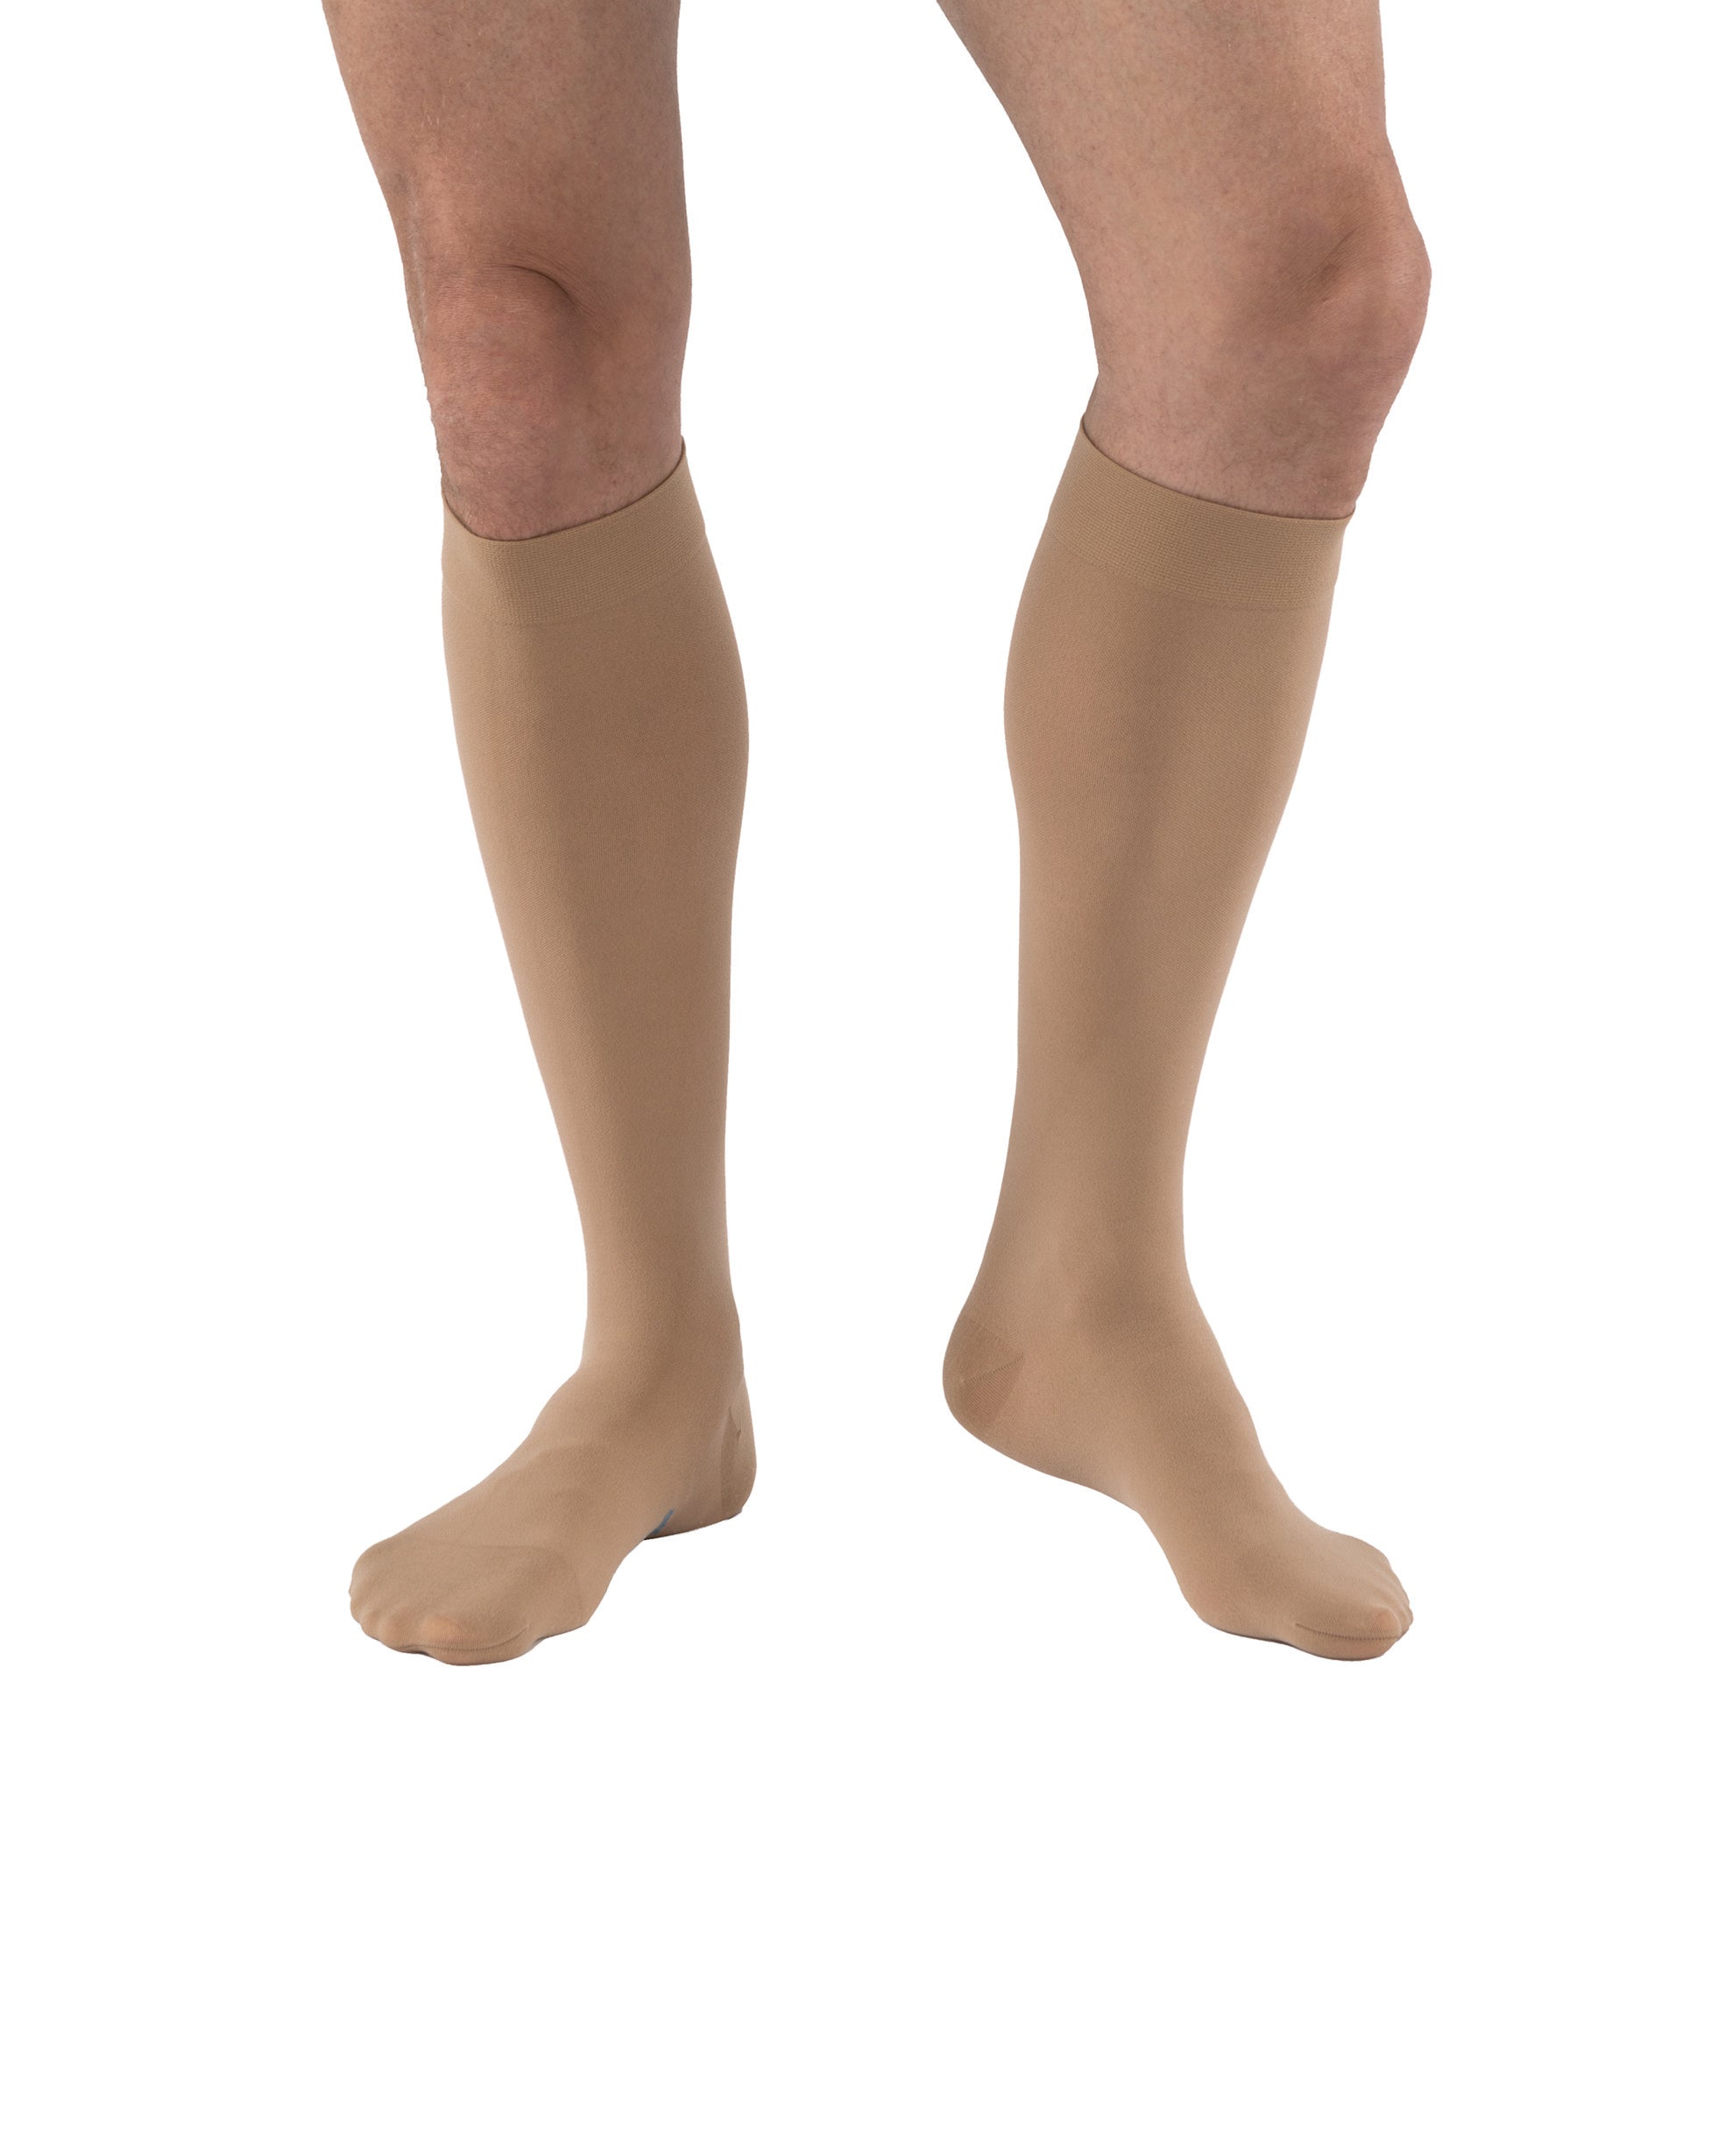 JOBST Relief Compression Stockings 20-30 mmHg Knee High